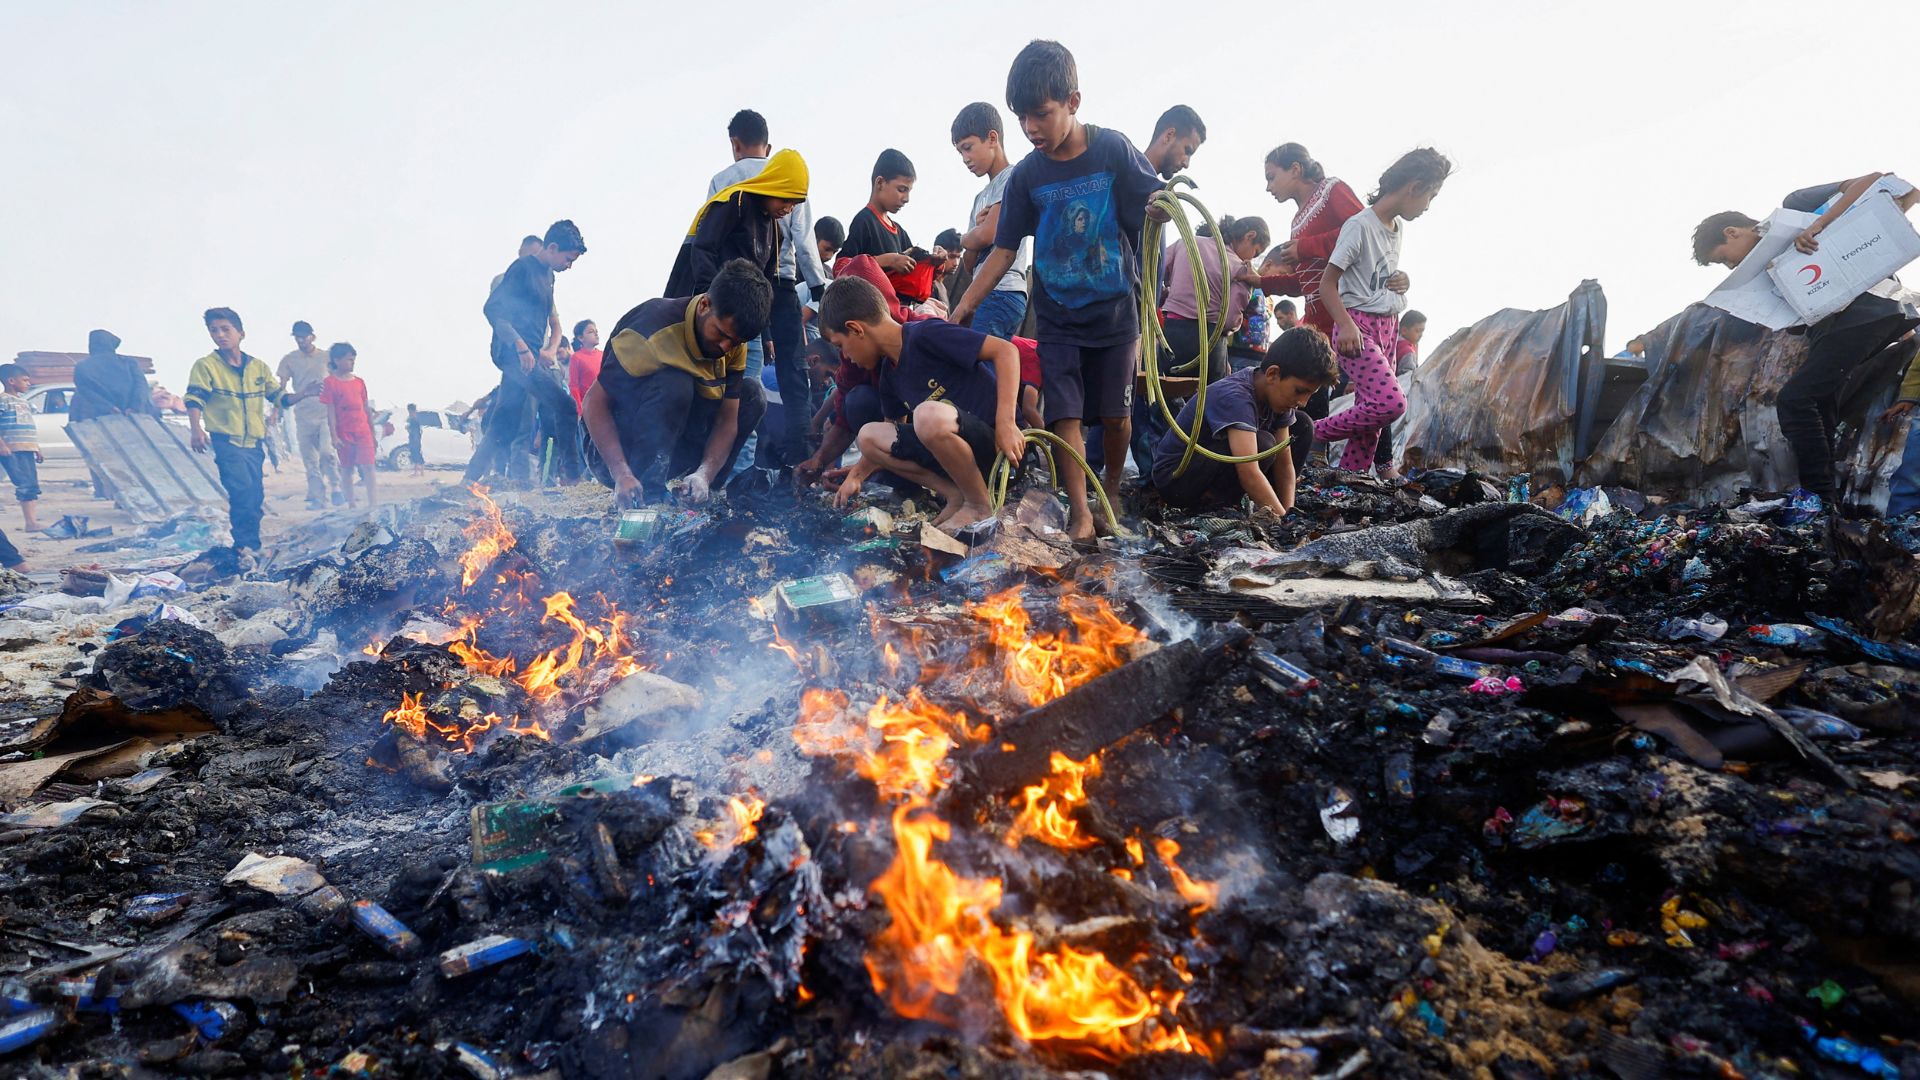 Palestinians search for food among burnt debris in the aftermath of the  Israeli air strikes. /Mohammed Salem/Reuters